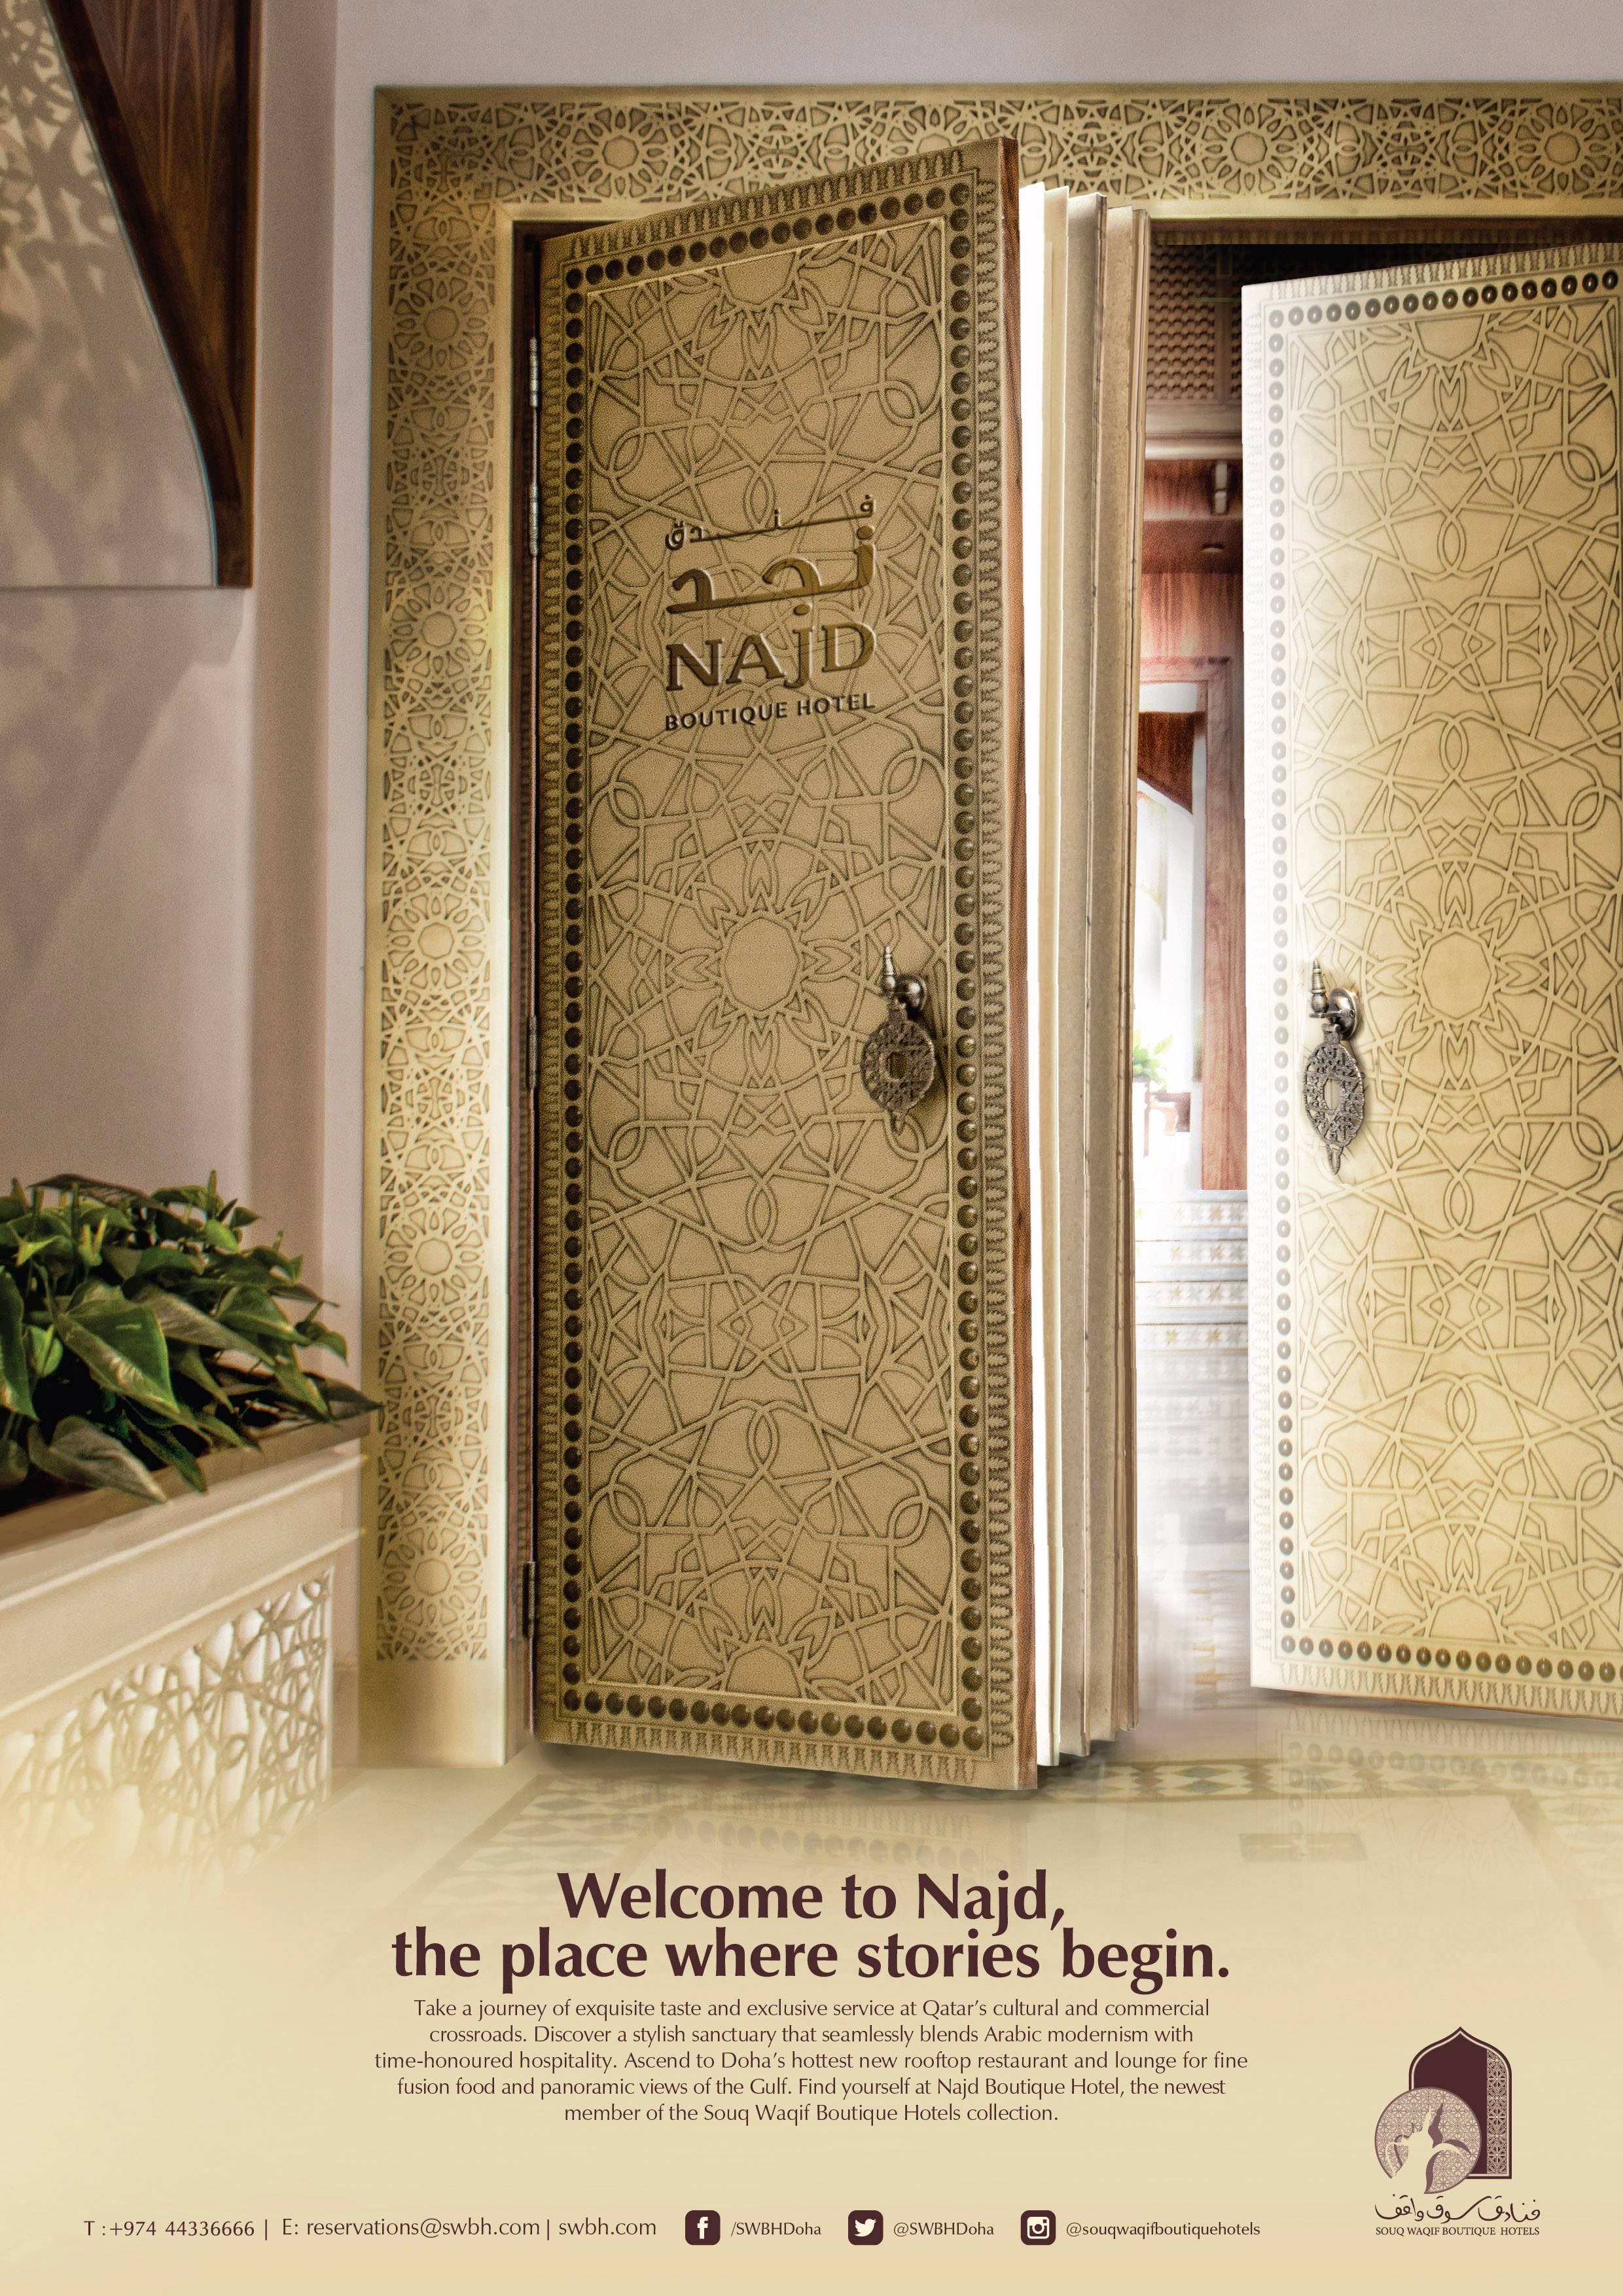 Welcome to Najd, the place where stories begin. iBall Splendo Campaigns of the World®